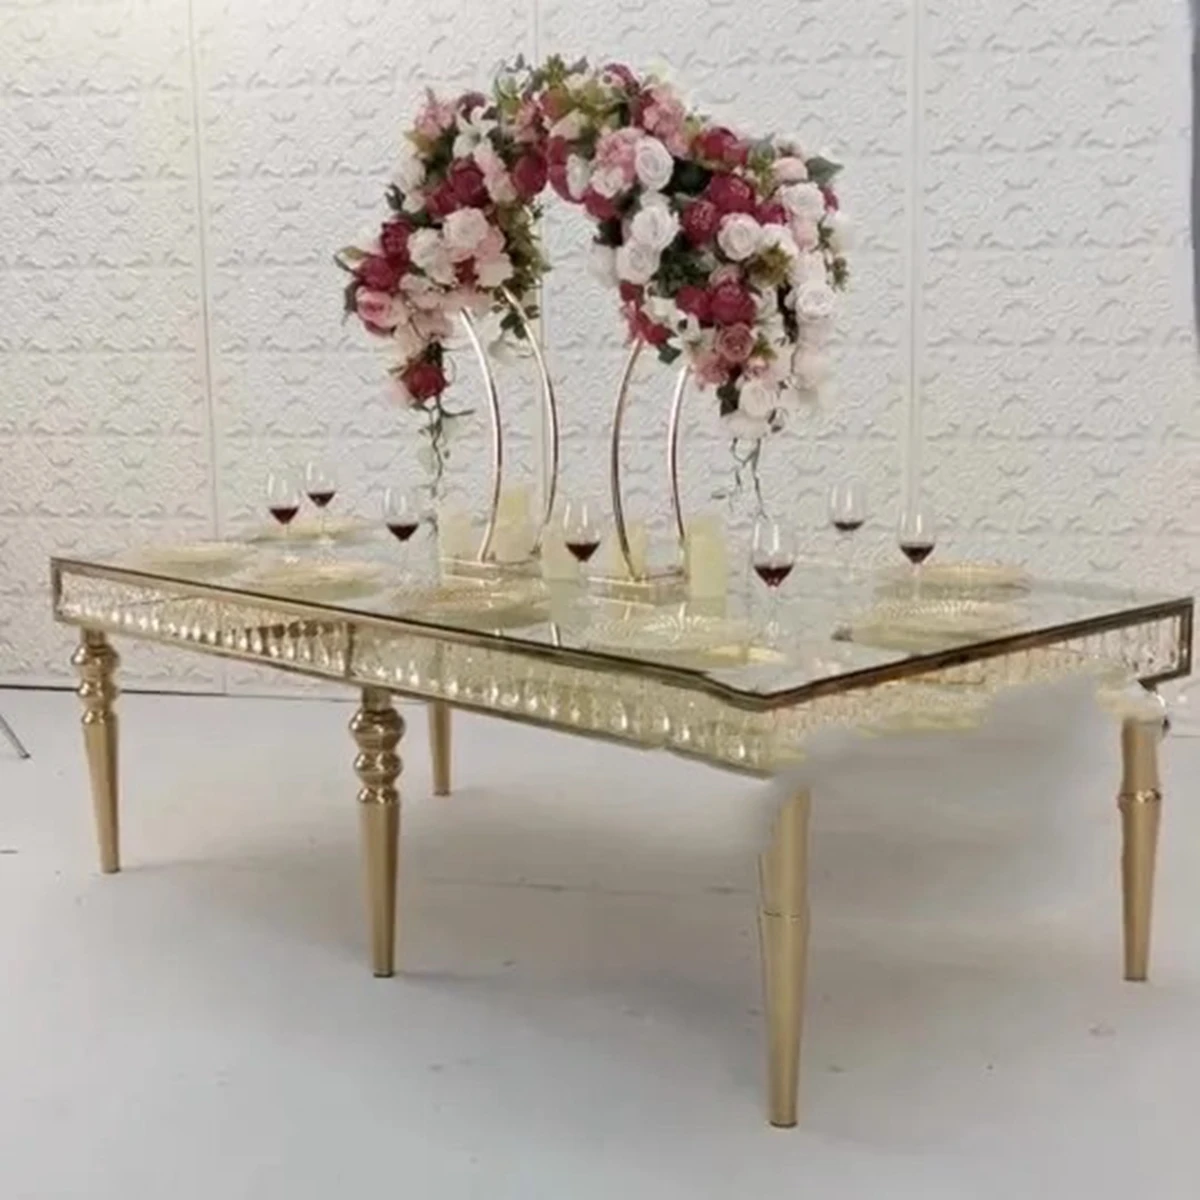 

6pcs)80cm tall)Luxury wedding arch backdrop gold metal backdrop stand flower wall panel flower runner stand for centerpiece 480